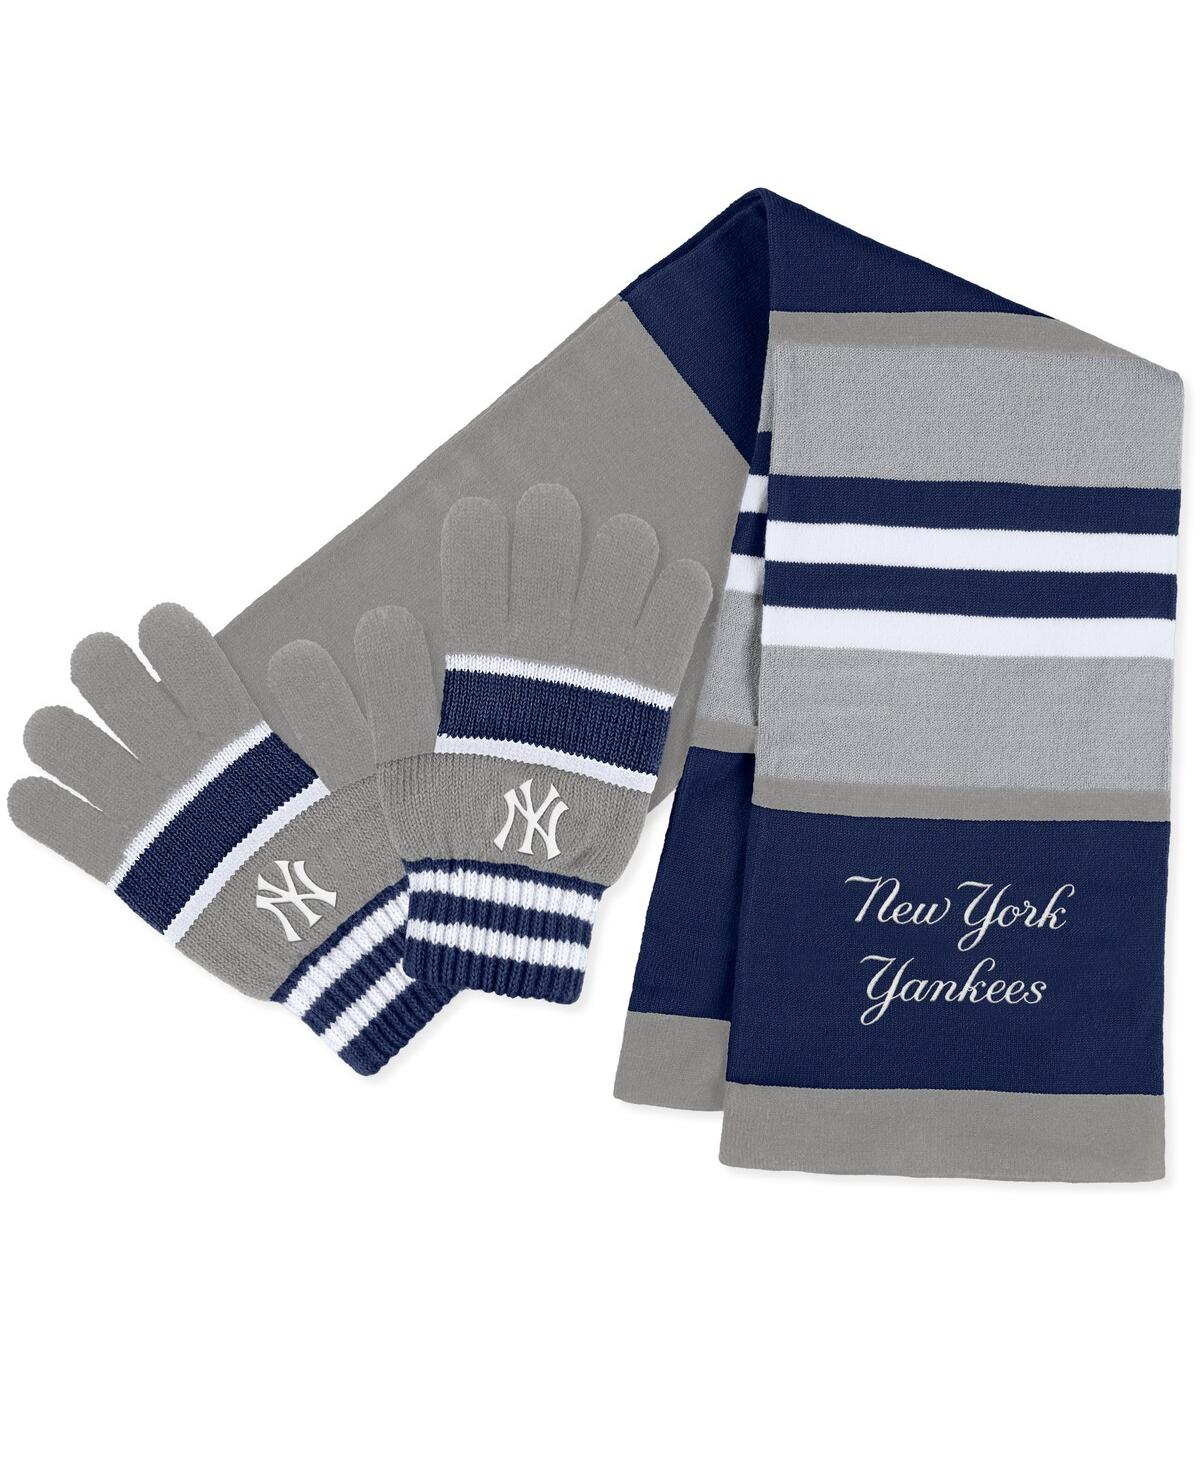 Wear By Erin Andrews Women's  New York Yankees Stripe Glove And Scarf Set In Multi